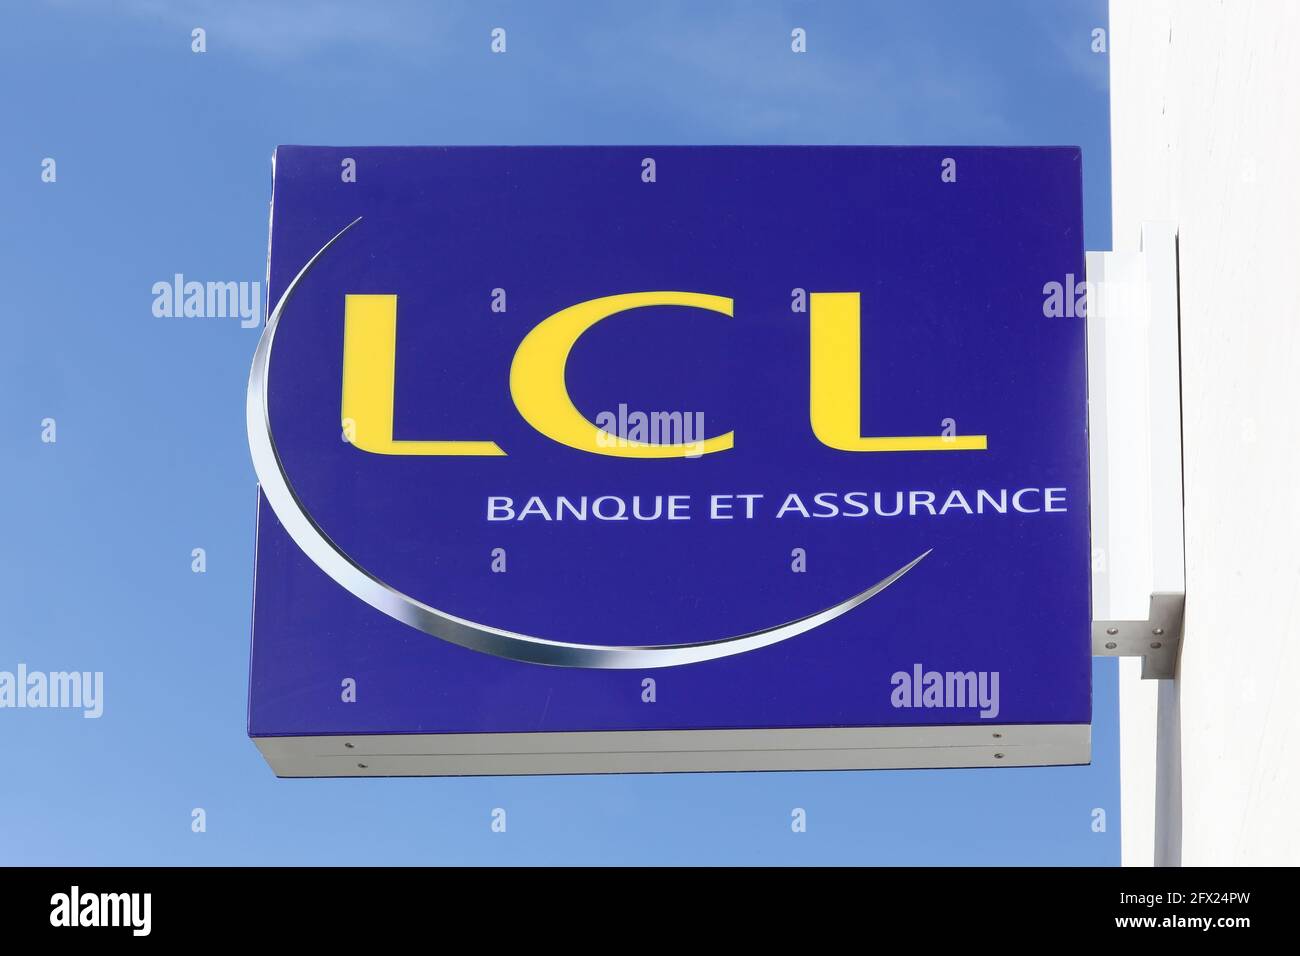 Lyon, France - April 9, 2019: LCL or Credit Lyonnais logo on a wall. Credit Lyonnais is a historic French bank and one of the biggest in France Stock Photo